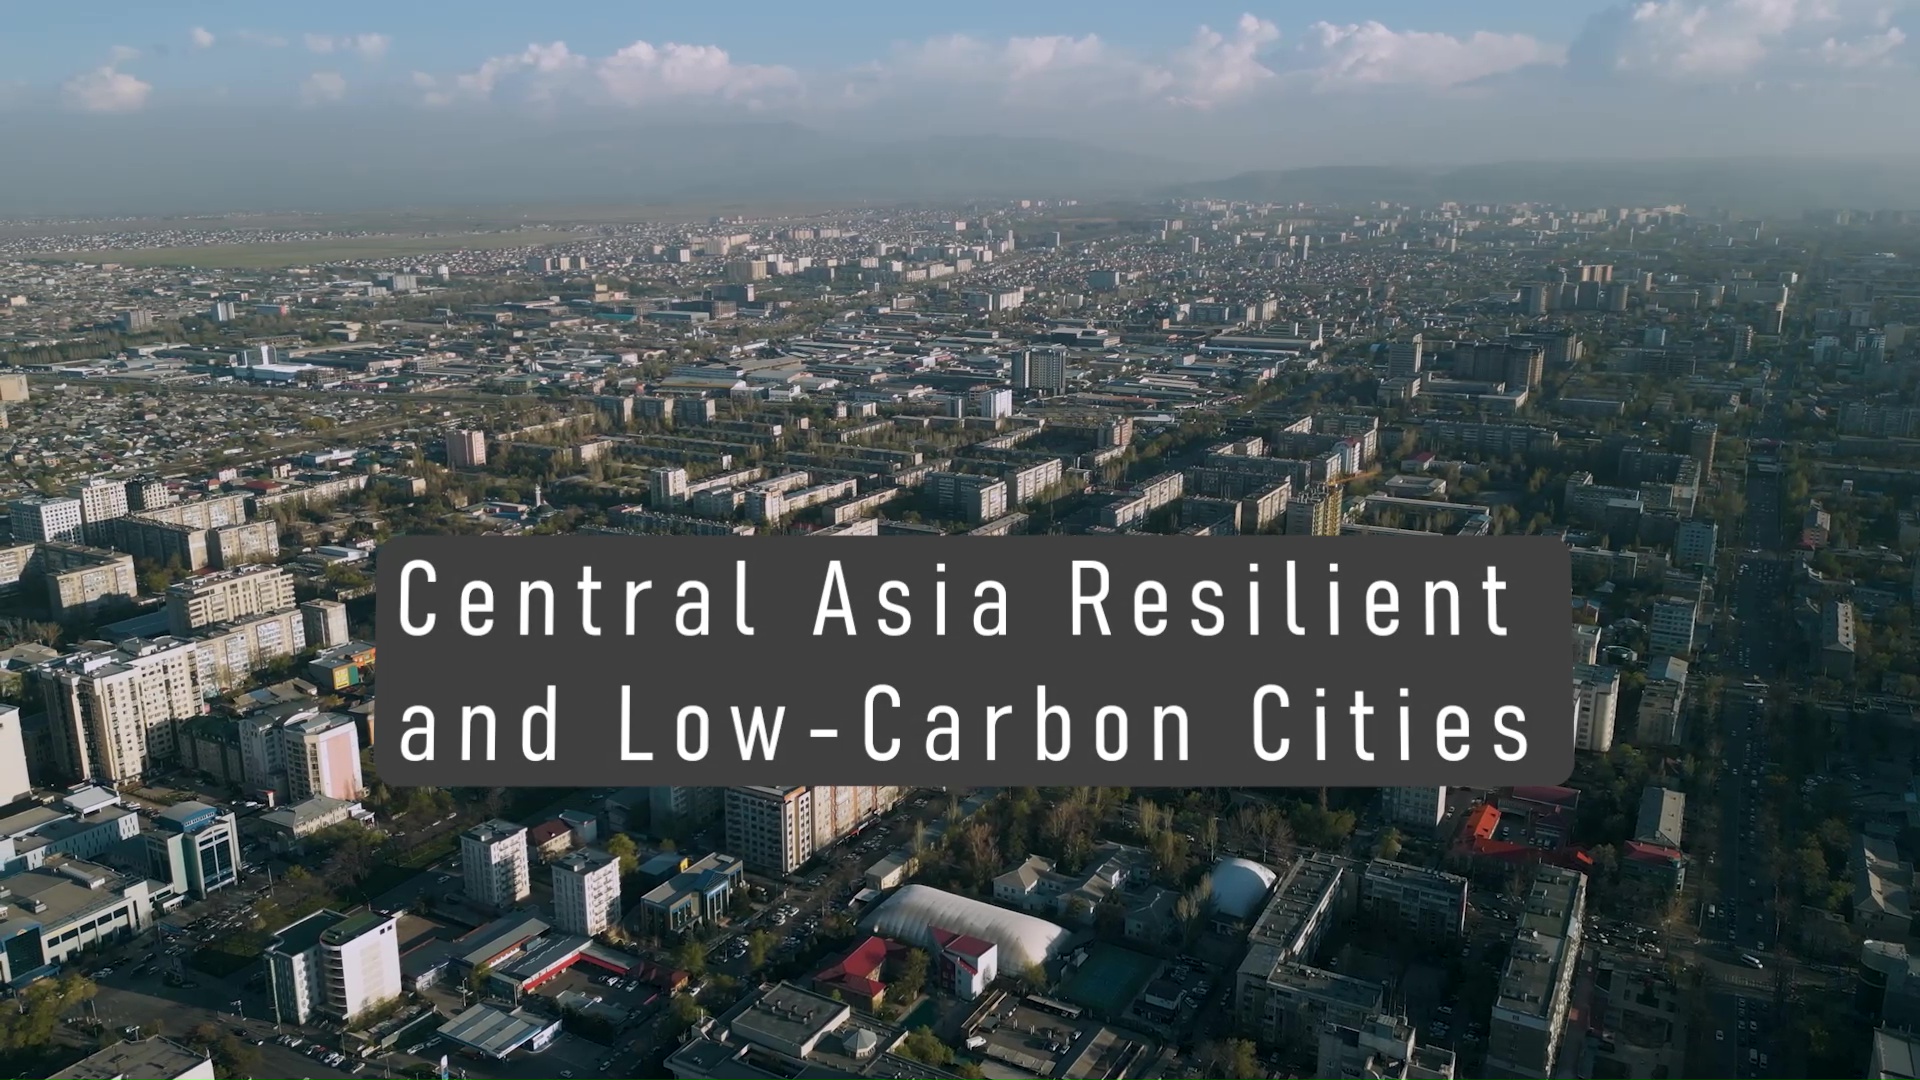 Central Asia Resilient and Low-Carbon Cities: Discussing